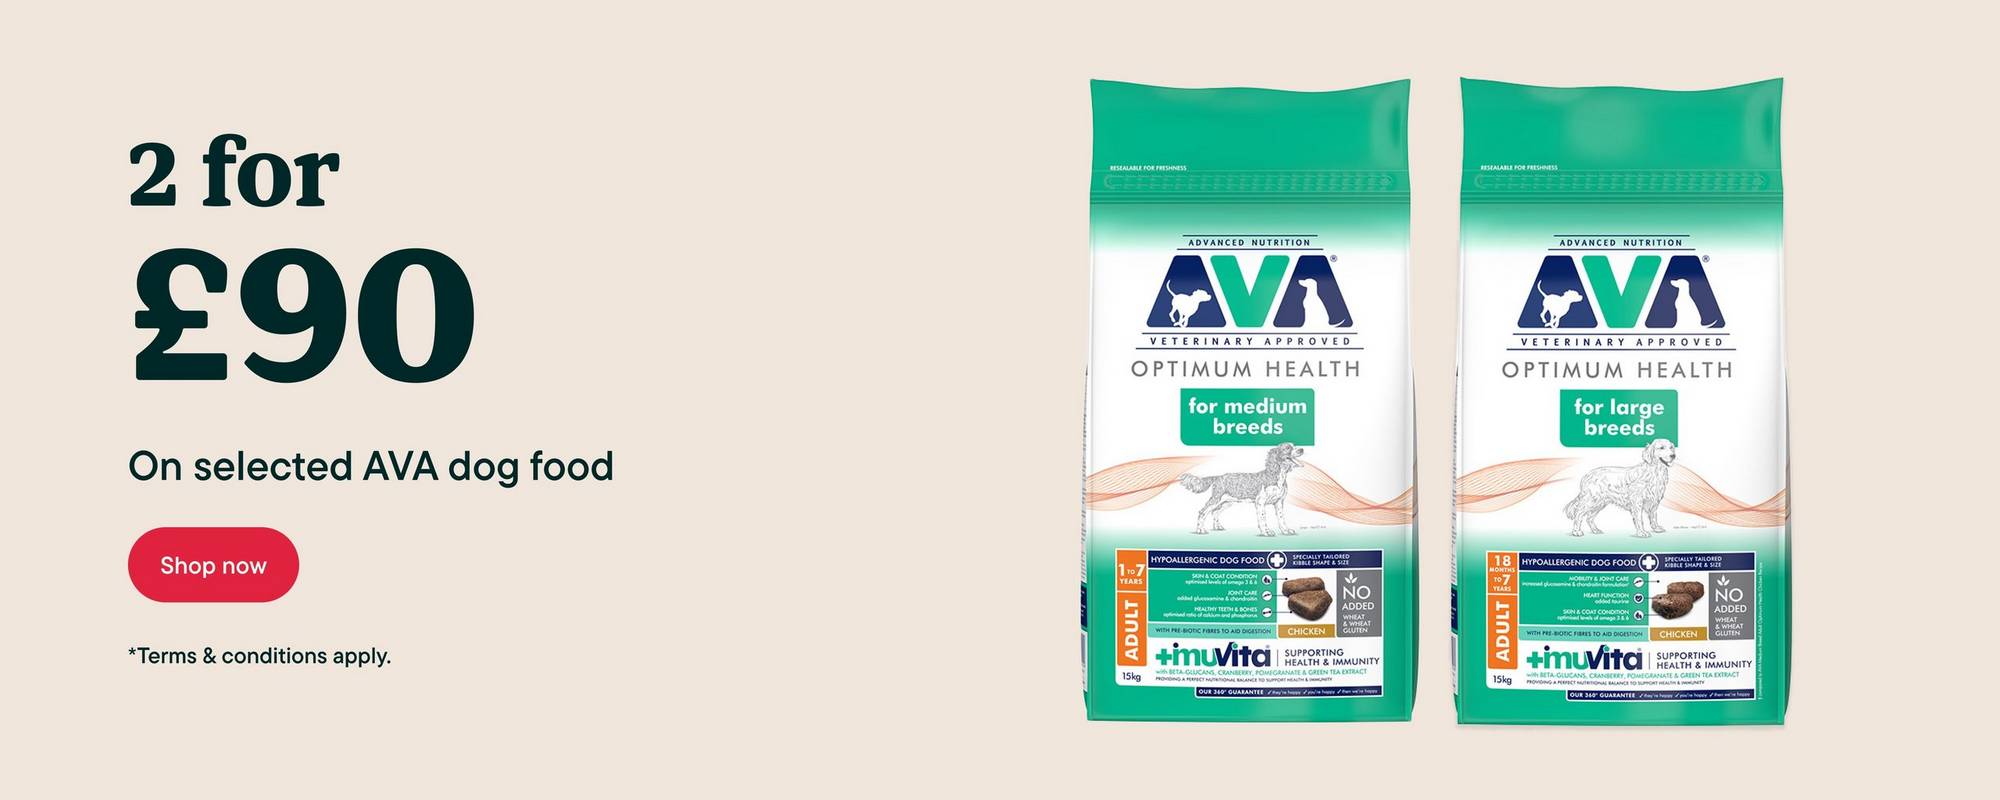 2 for £90 on selected AVA dog food